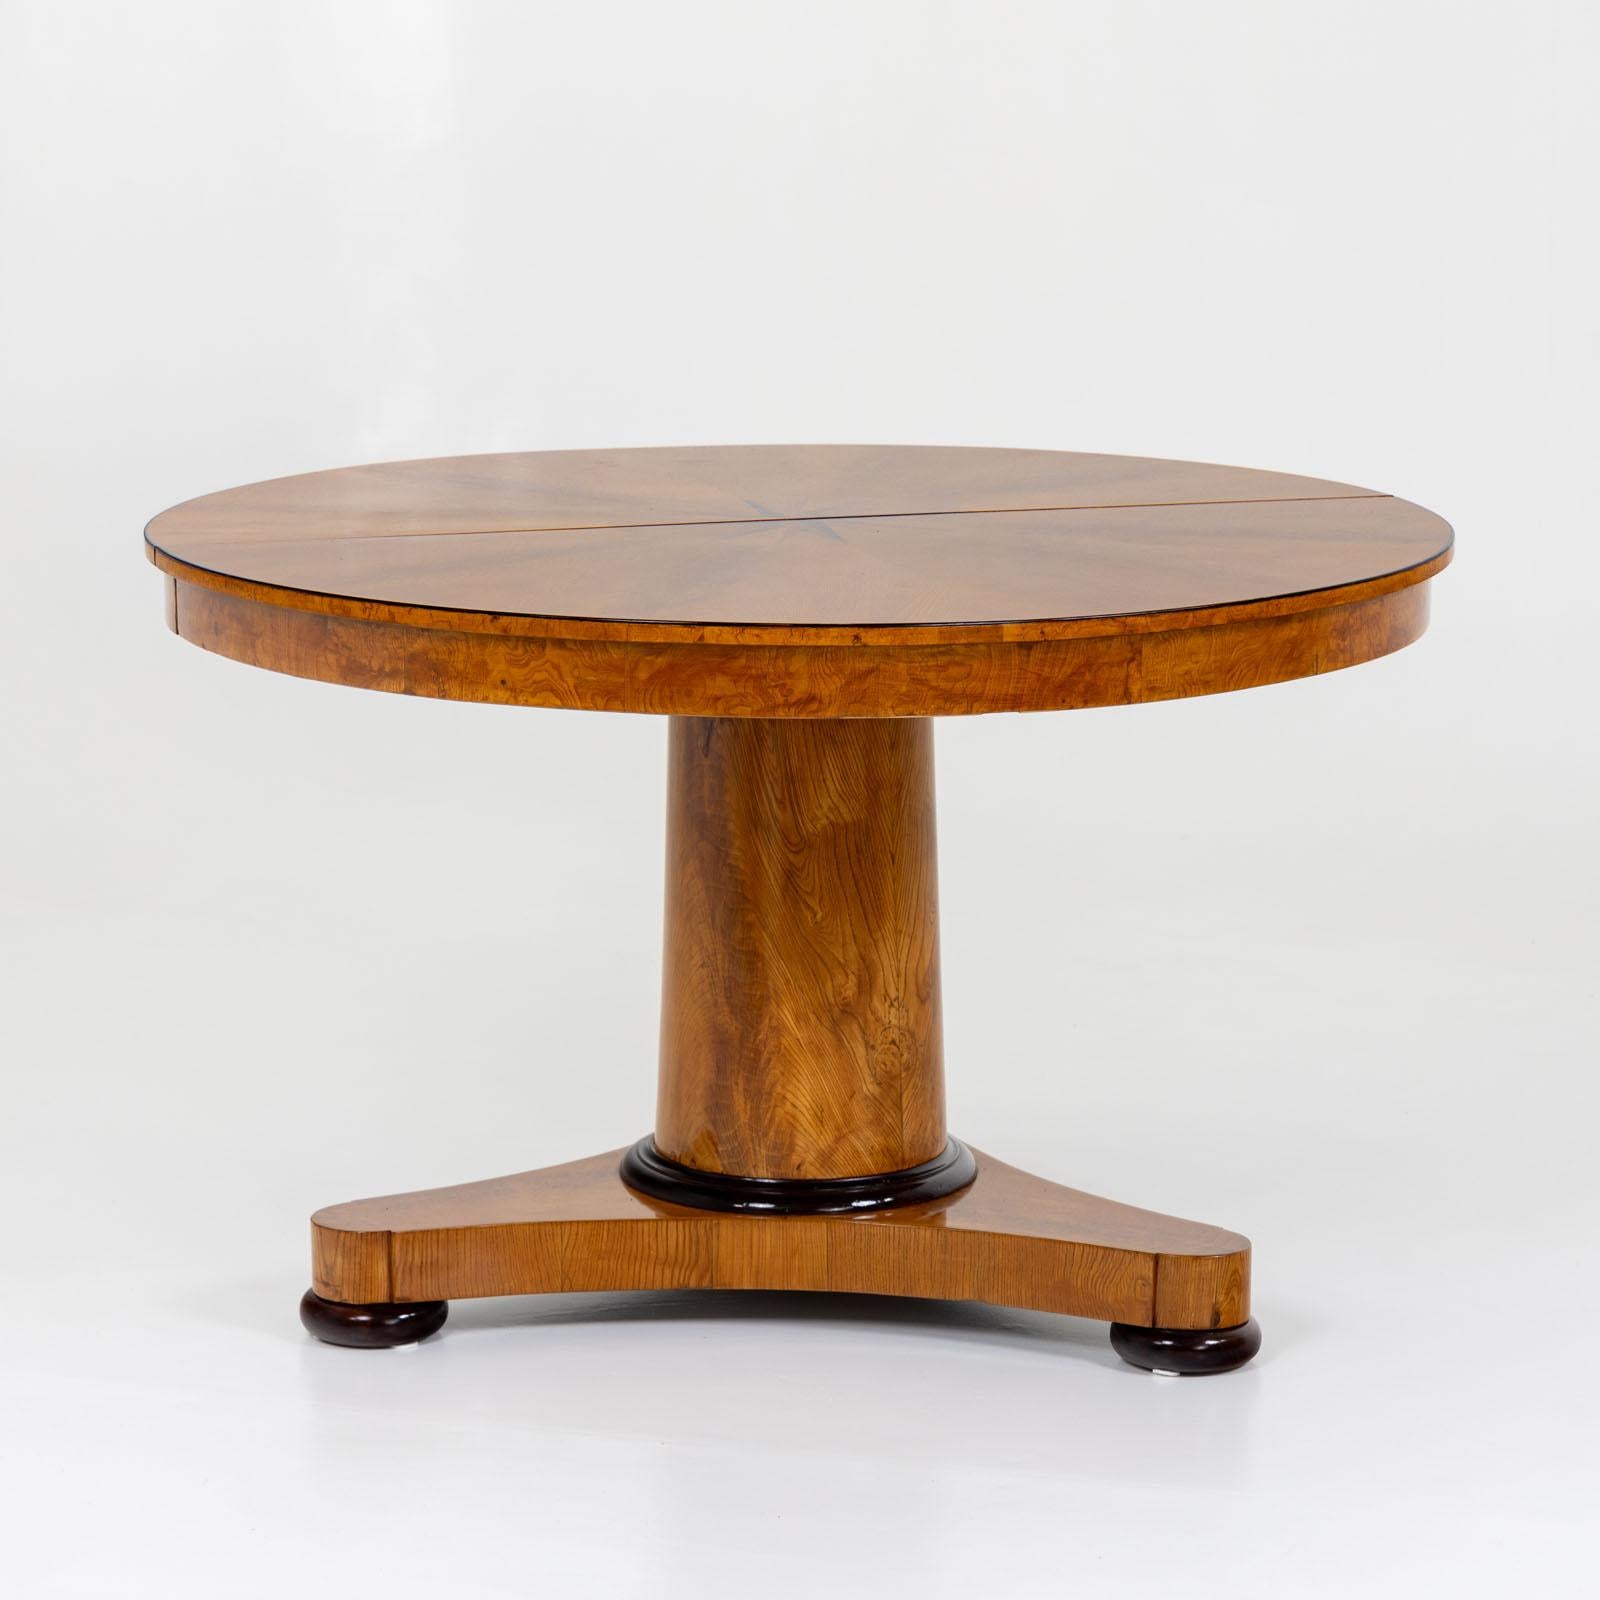 Biedermeier extending table with four inset tops and a maximum length of 320 cm. The table stands on a trefoil base with a strong, smooth central column and can be stabilized with fold-out conical legs if required. The table is veneered in ash and